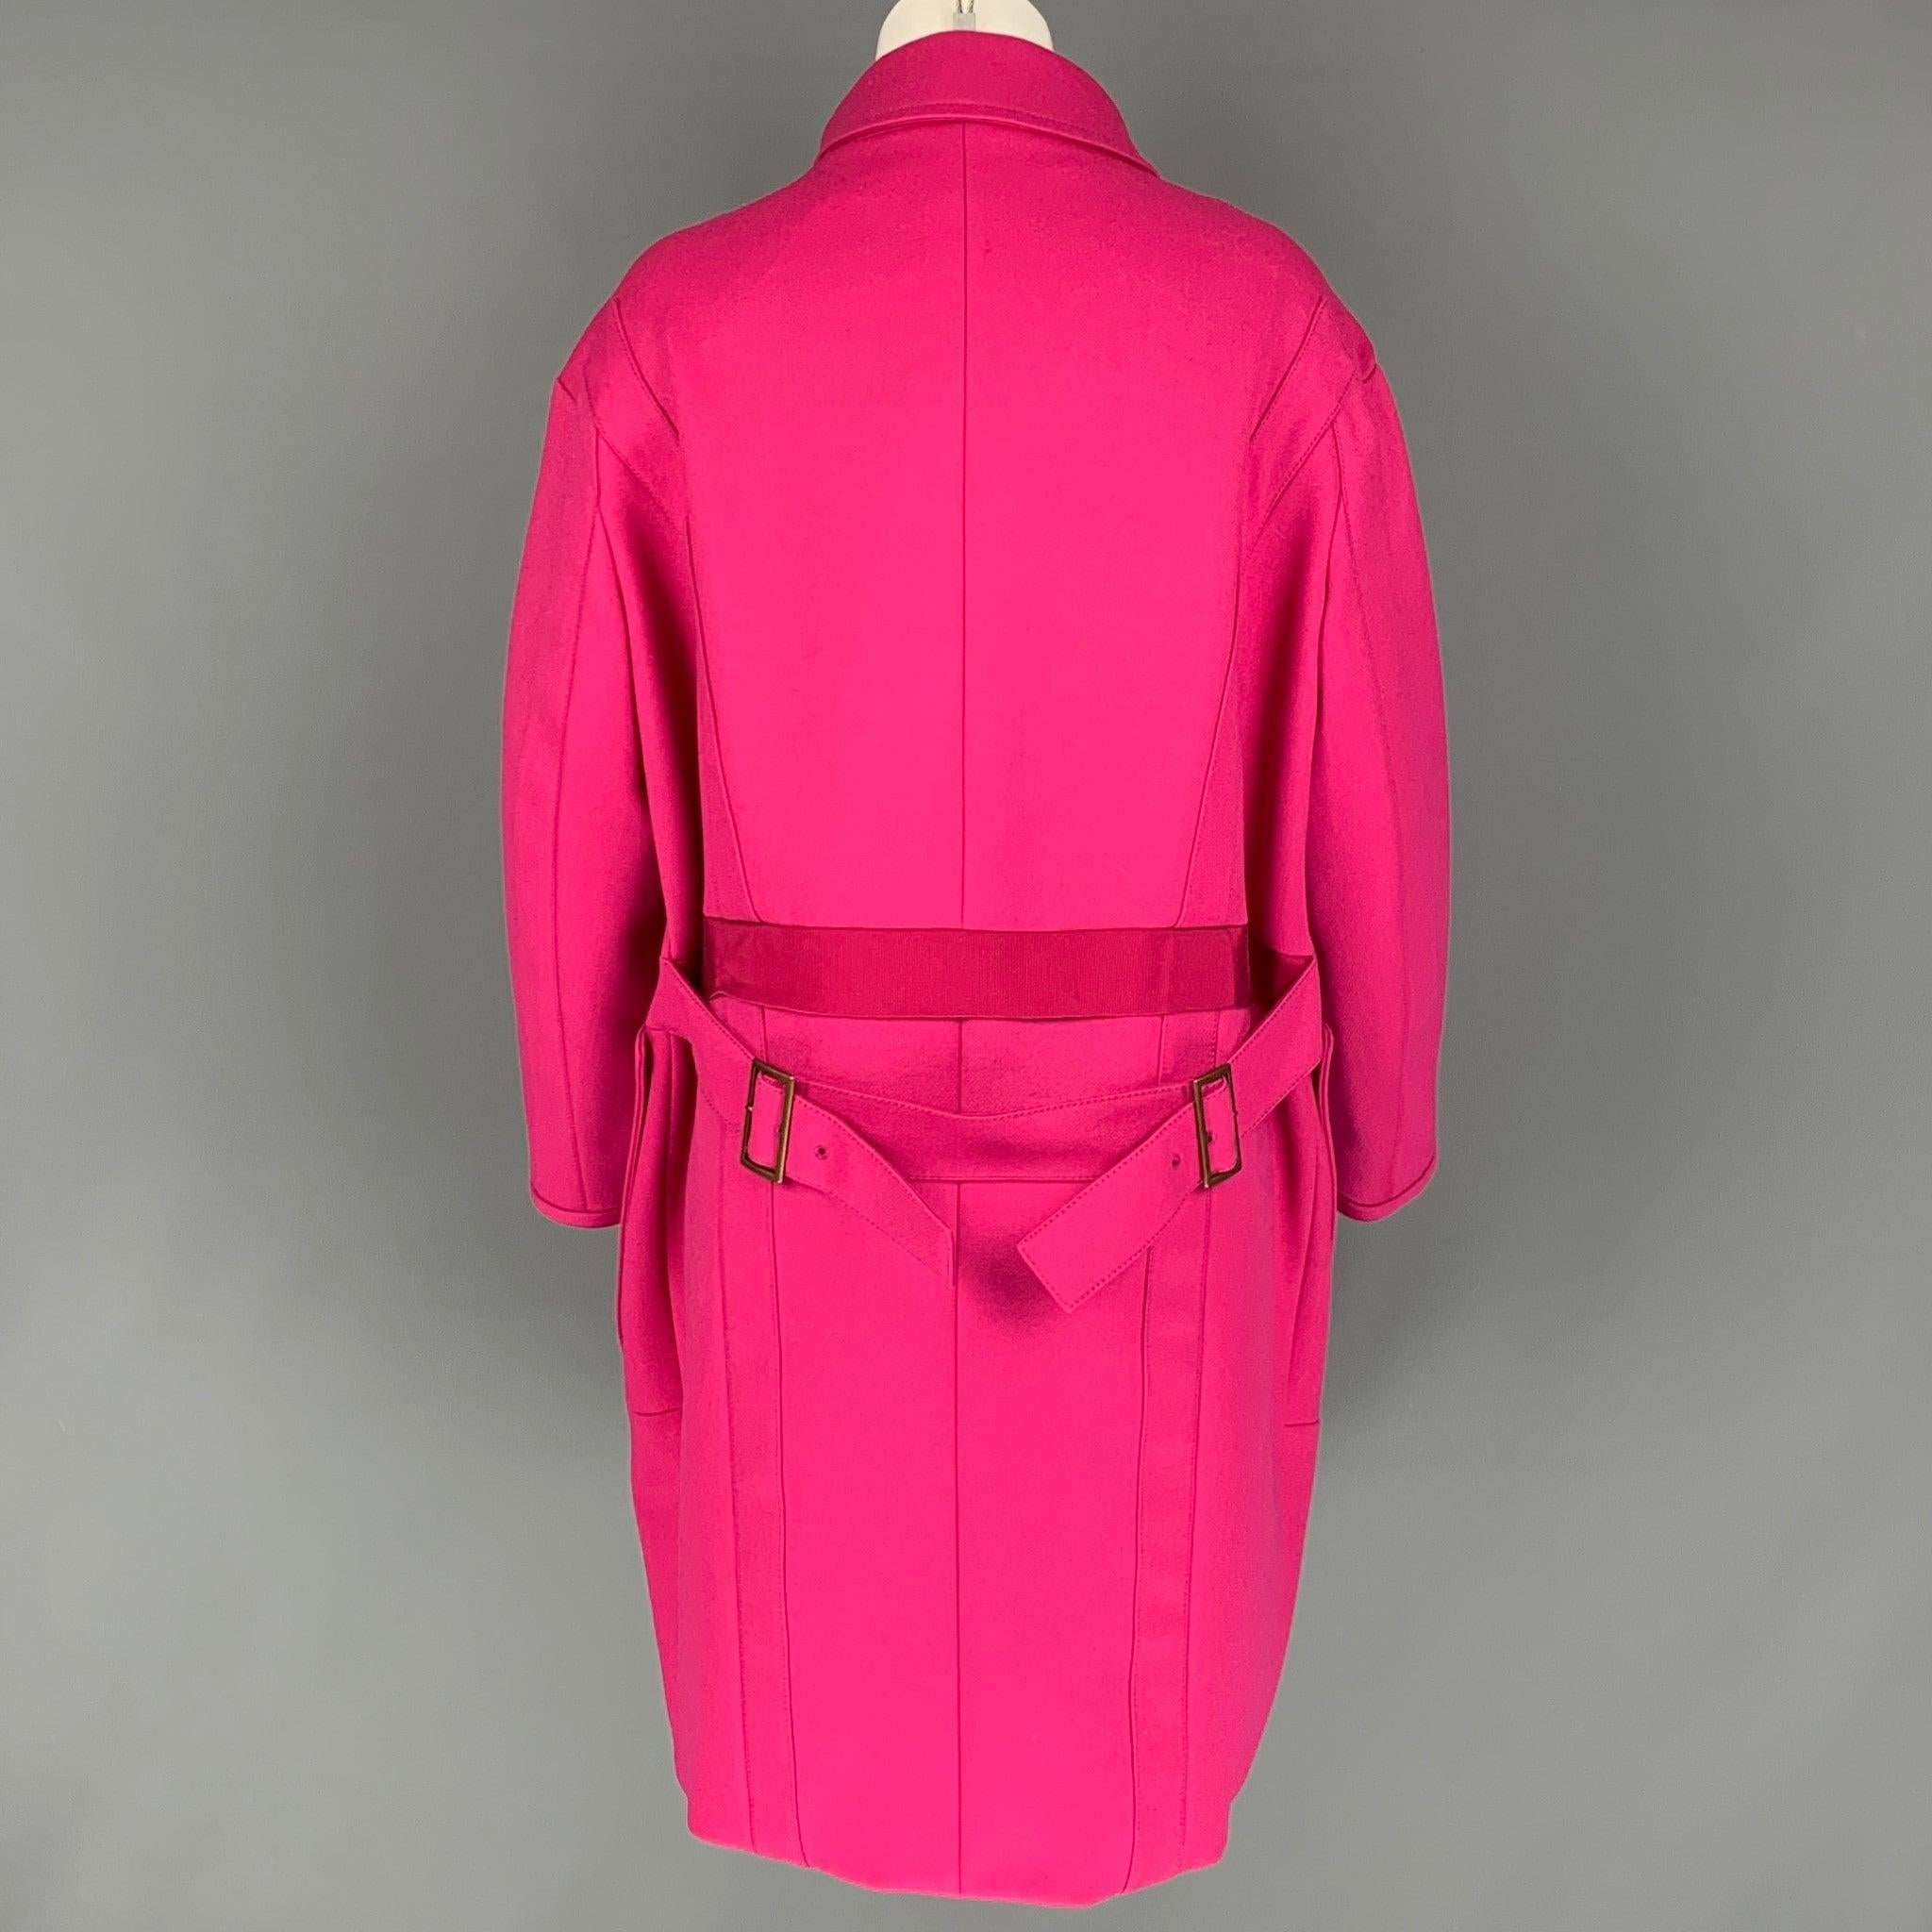 NINA RICCI Size 6 Pink Wool Solid Zip Up Coat In Excellent Condition For Sale In San Francisco, CA